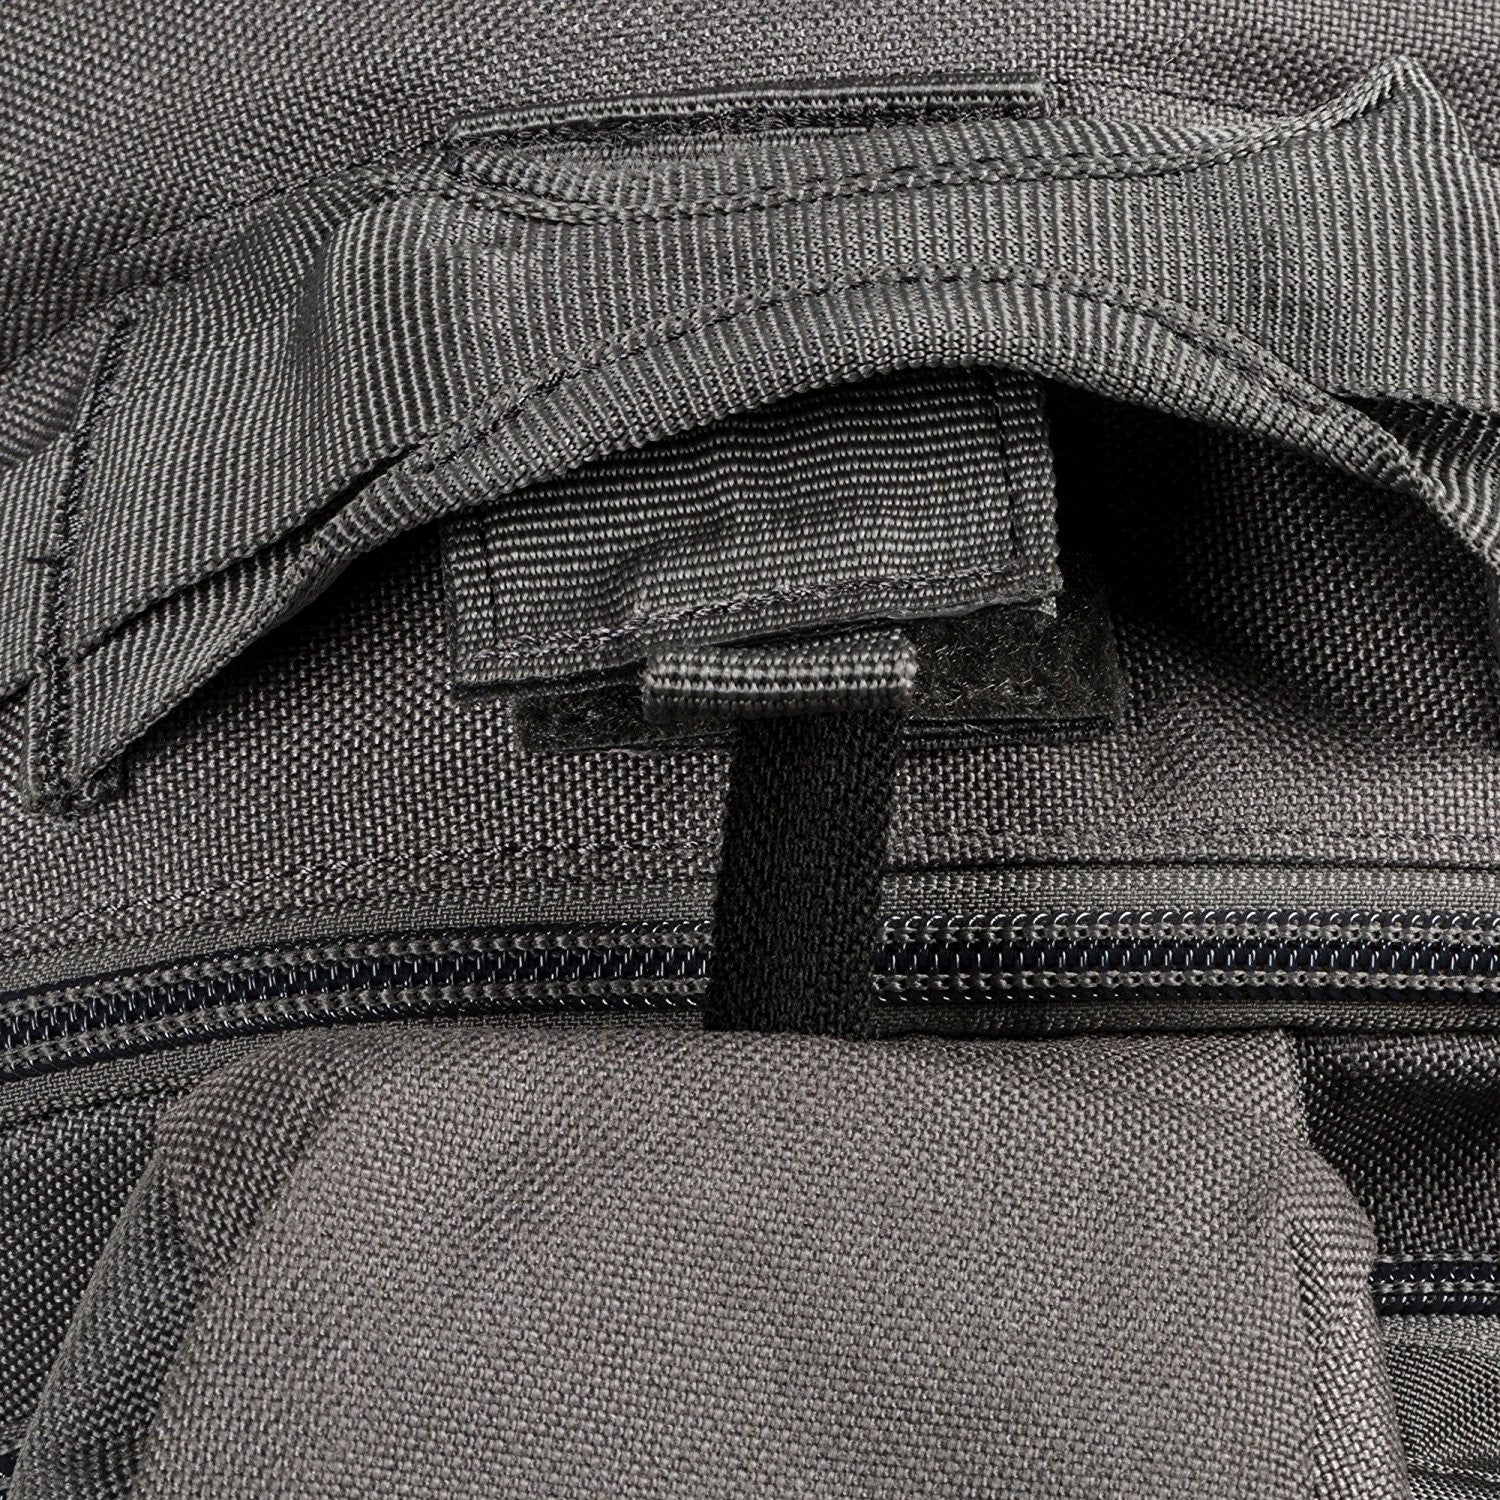 a close up of the zippers on a backpack